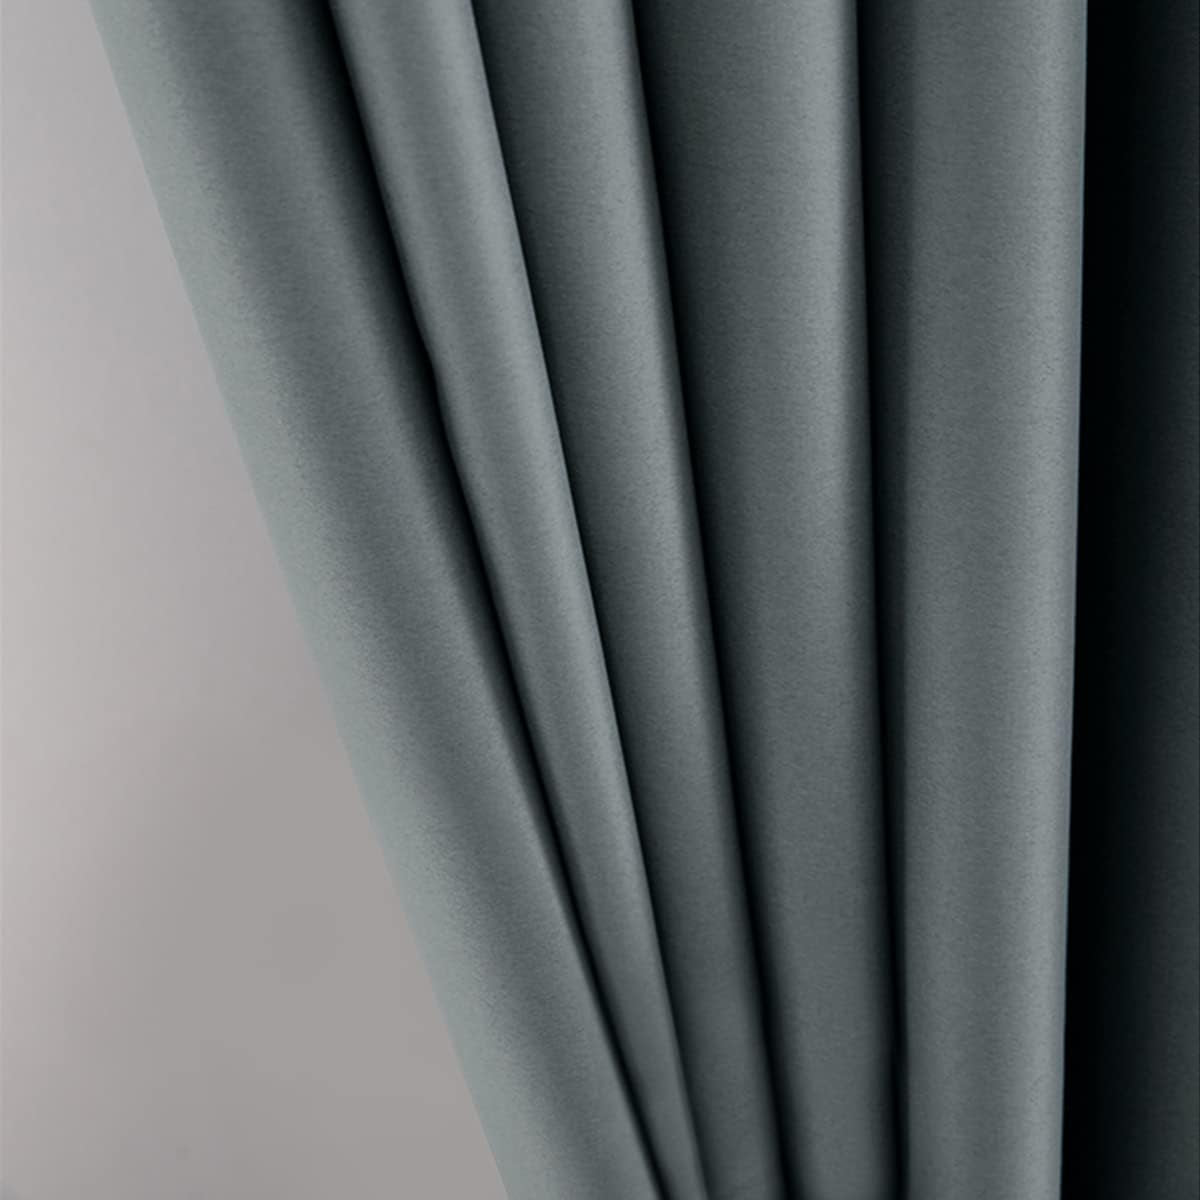 IYUEGO Pinch Pleat Solid Thermal Insulated 95% Greyout Patio Door Curtain Panel Drape for Traverse Rod and Track, Grey 52" W X 84" L (One Panel)  I Love Curtains   